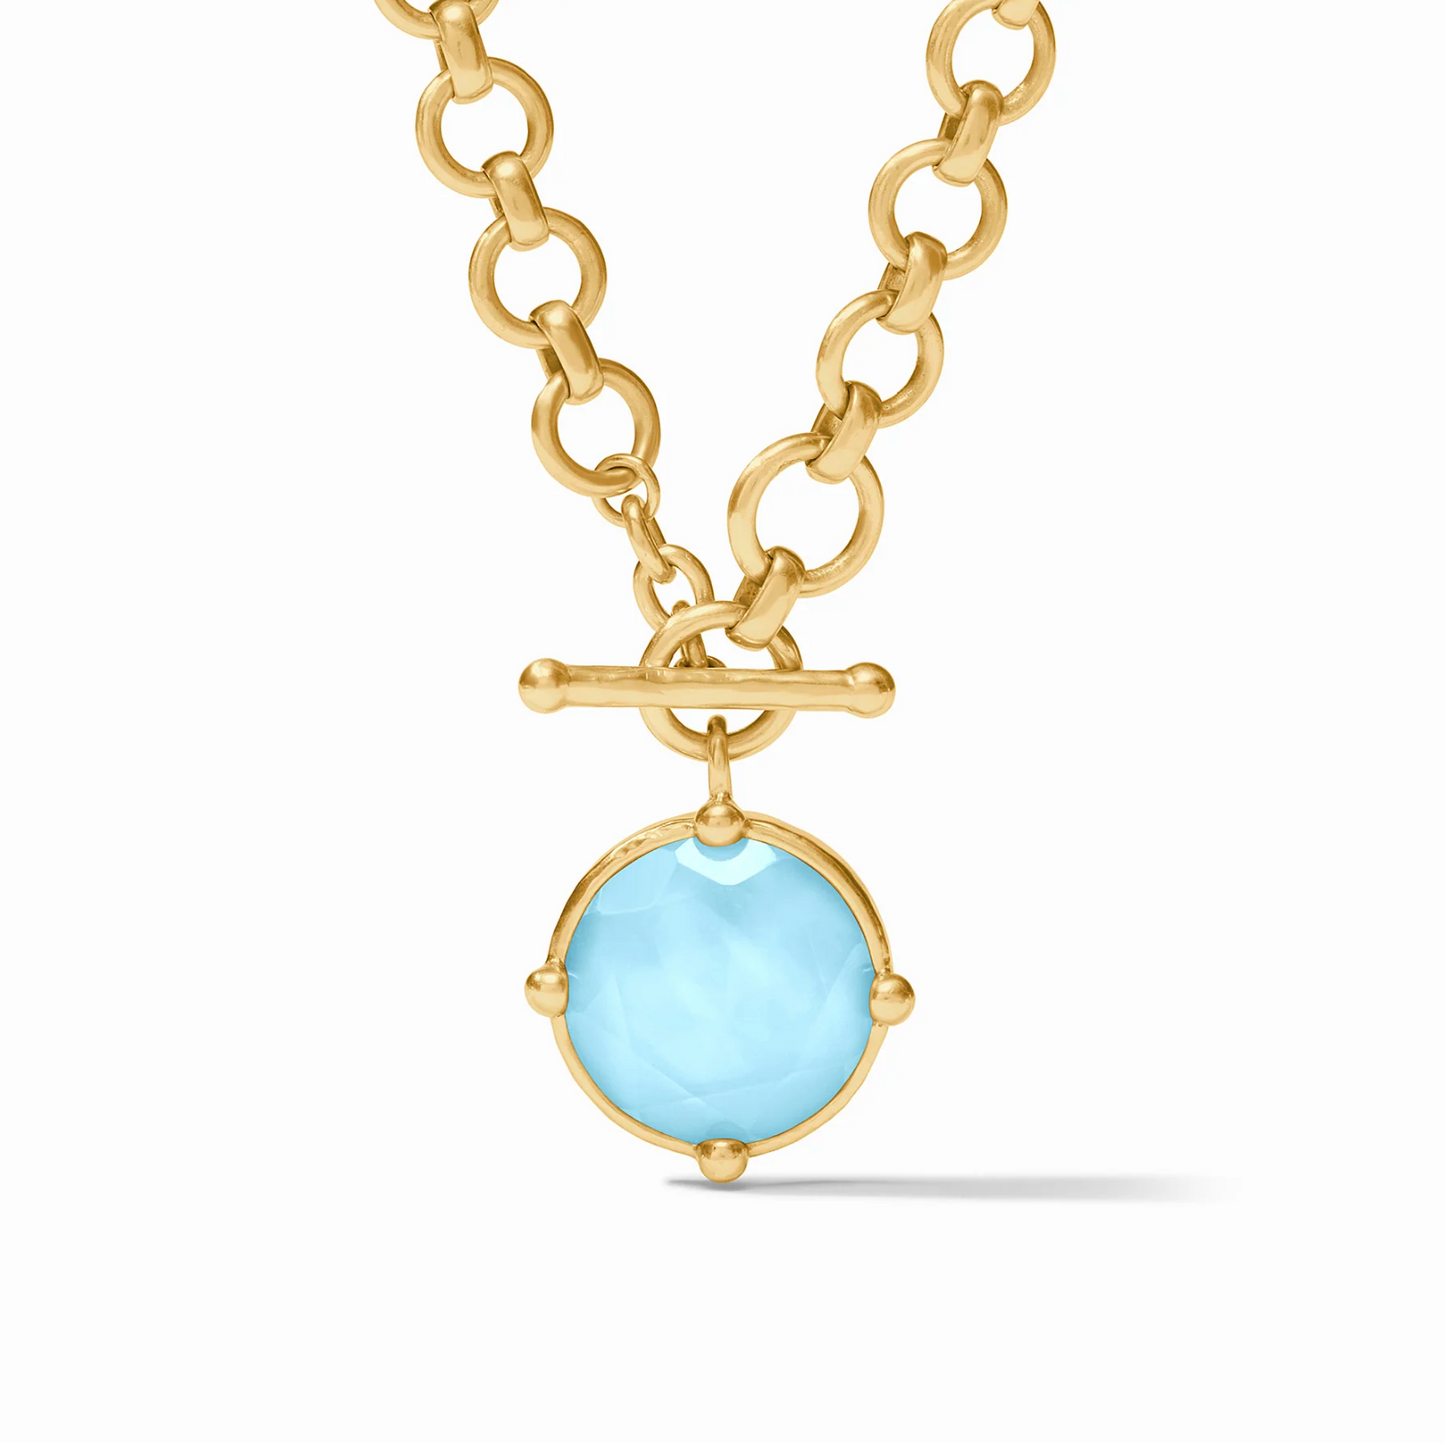 Honeybee Demi Necklace in Iridescent Capri Blue - The French Shoppe